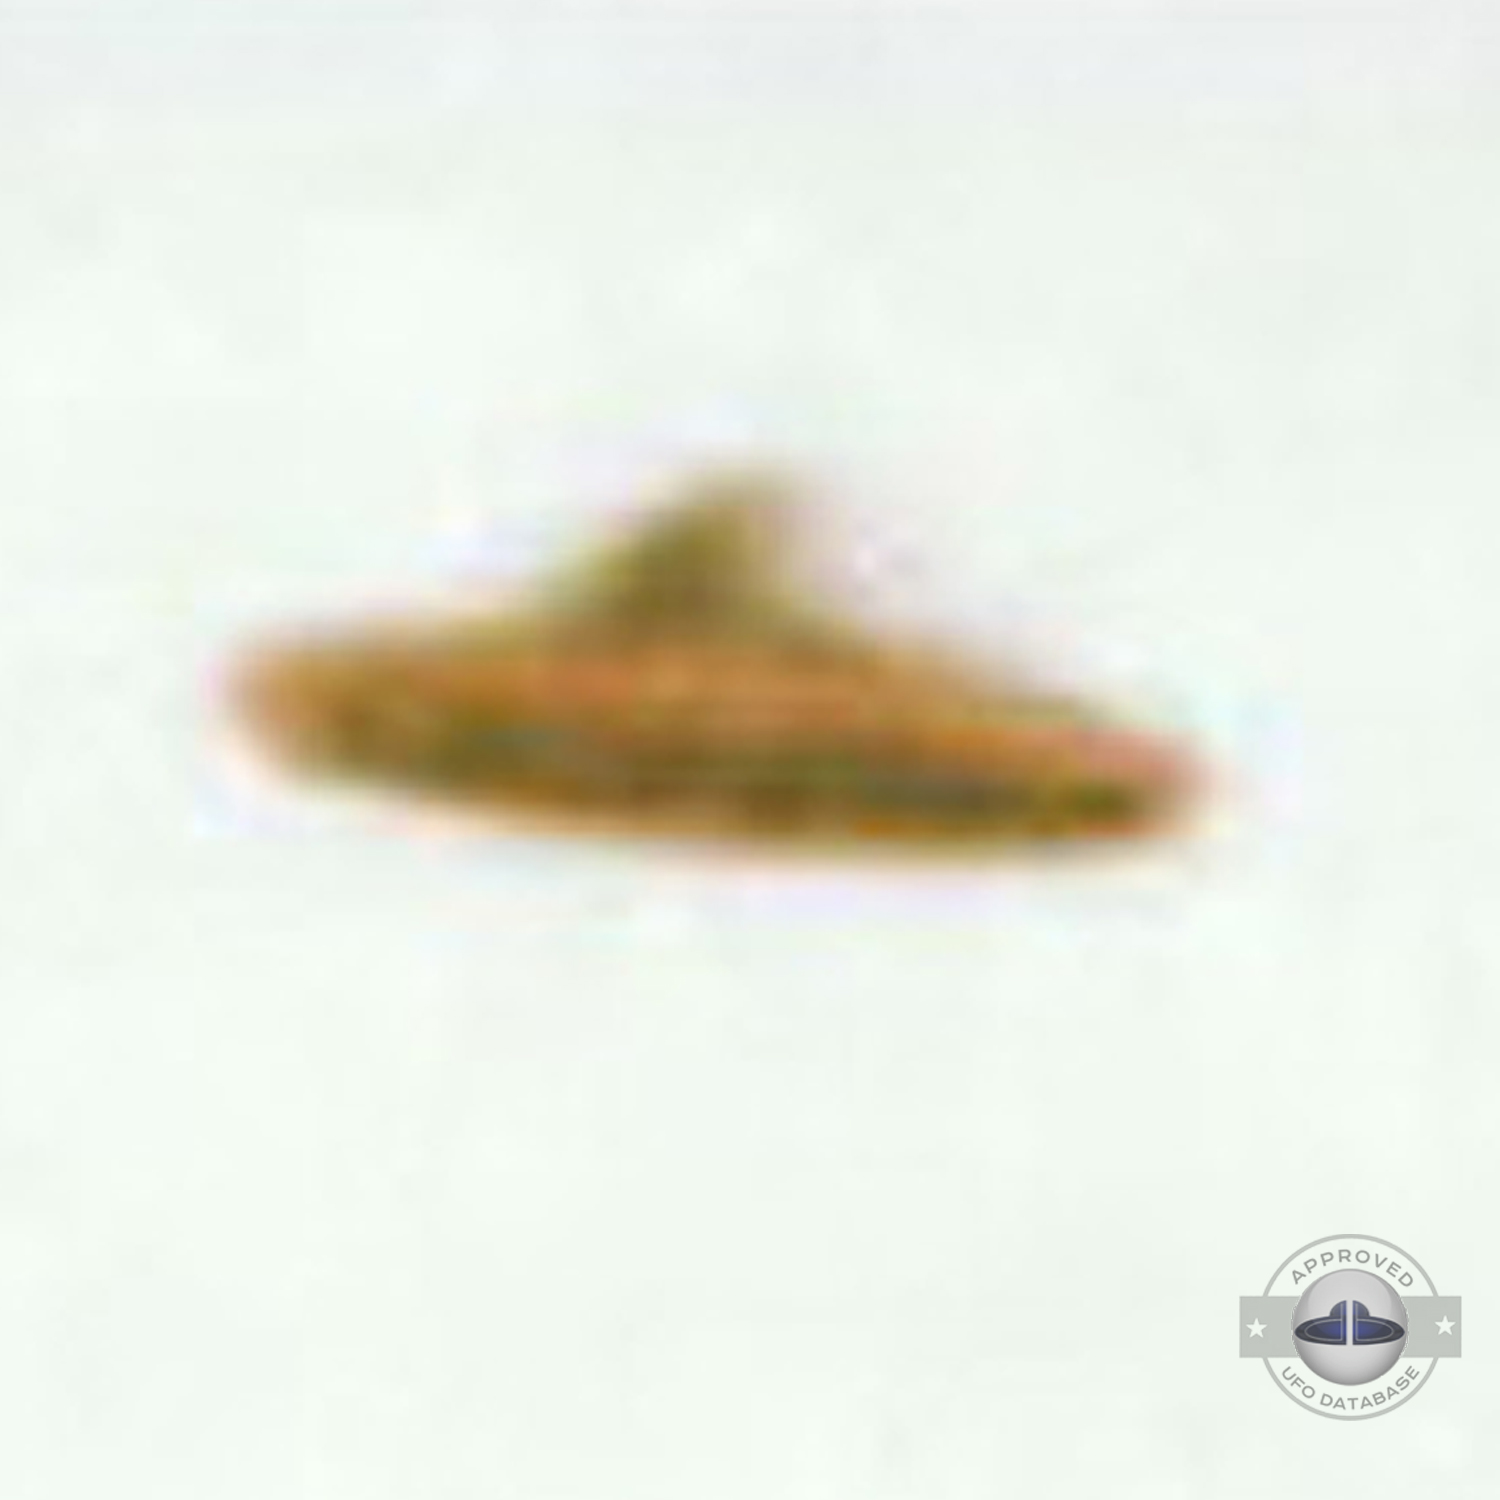 ufo picture was taken from a car ufo was few hundreds meters away UFO Picture #62-5